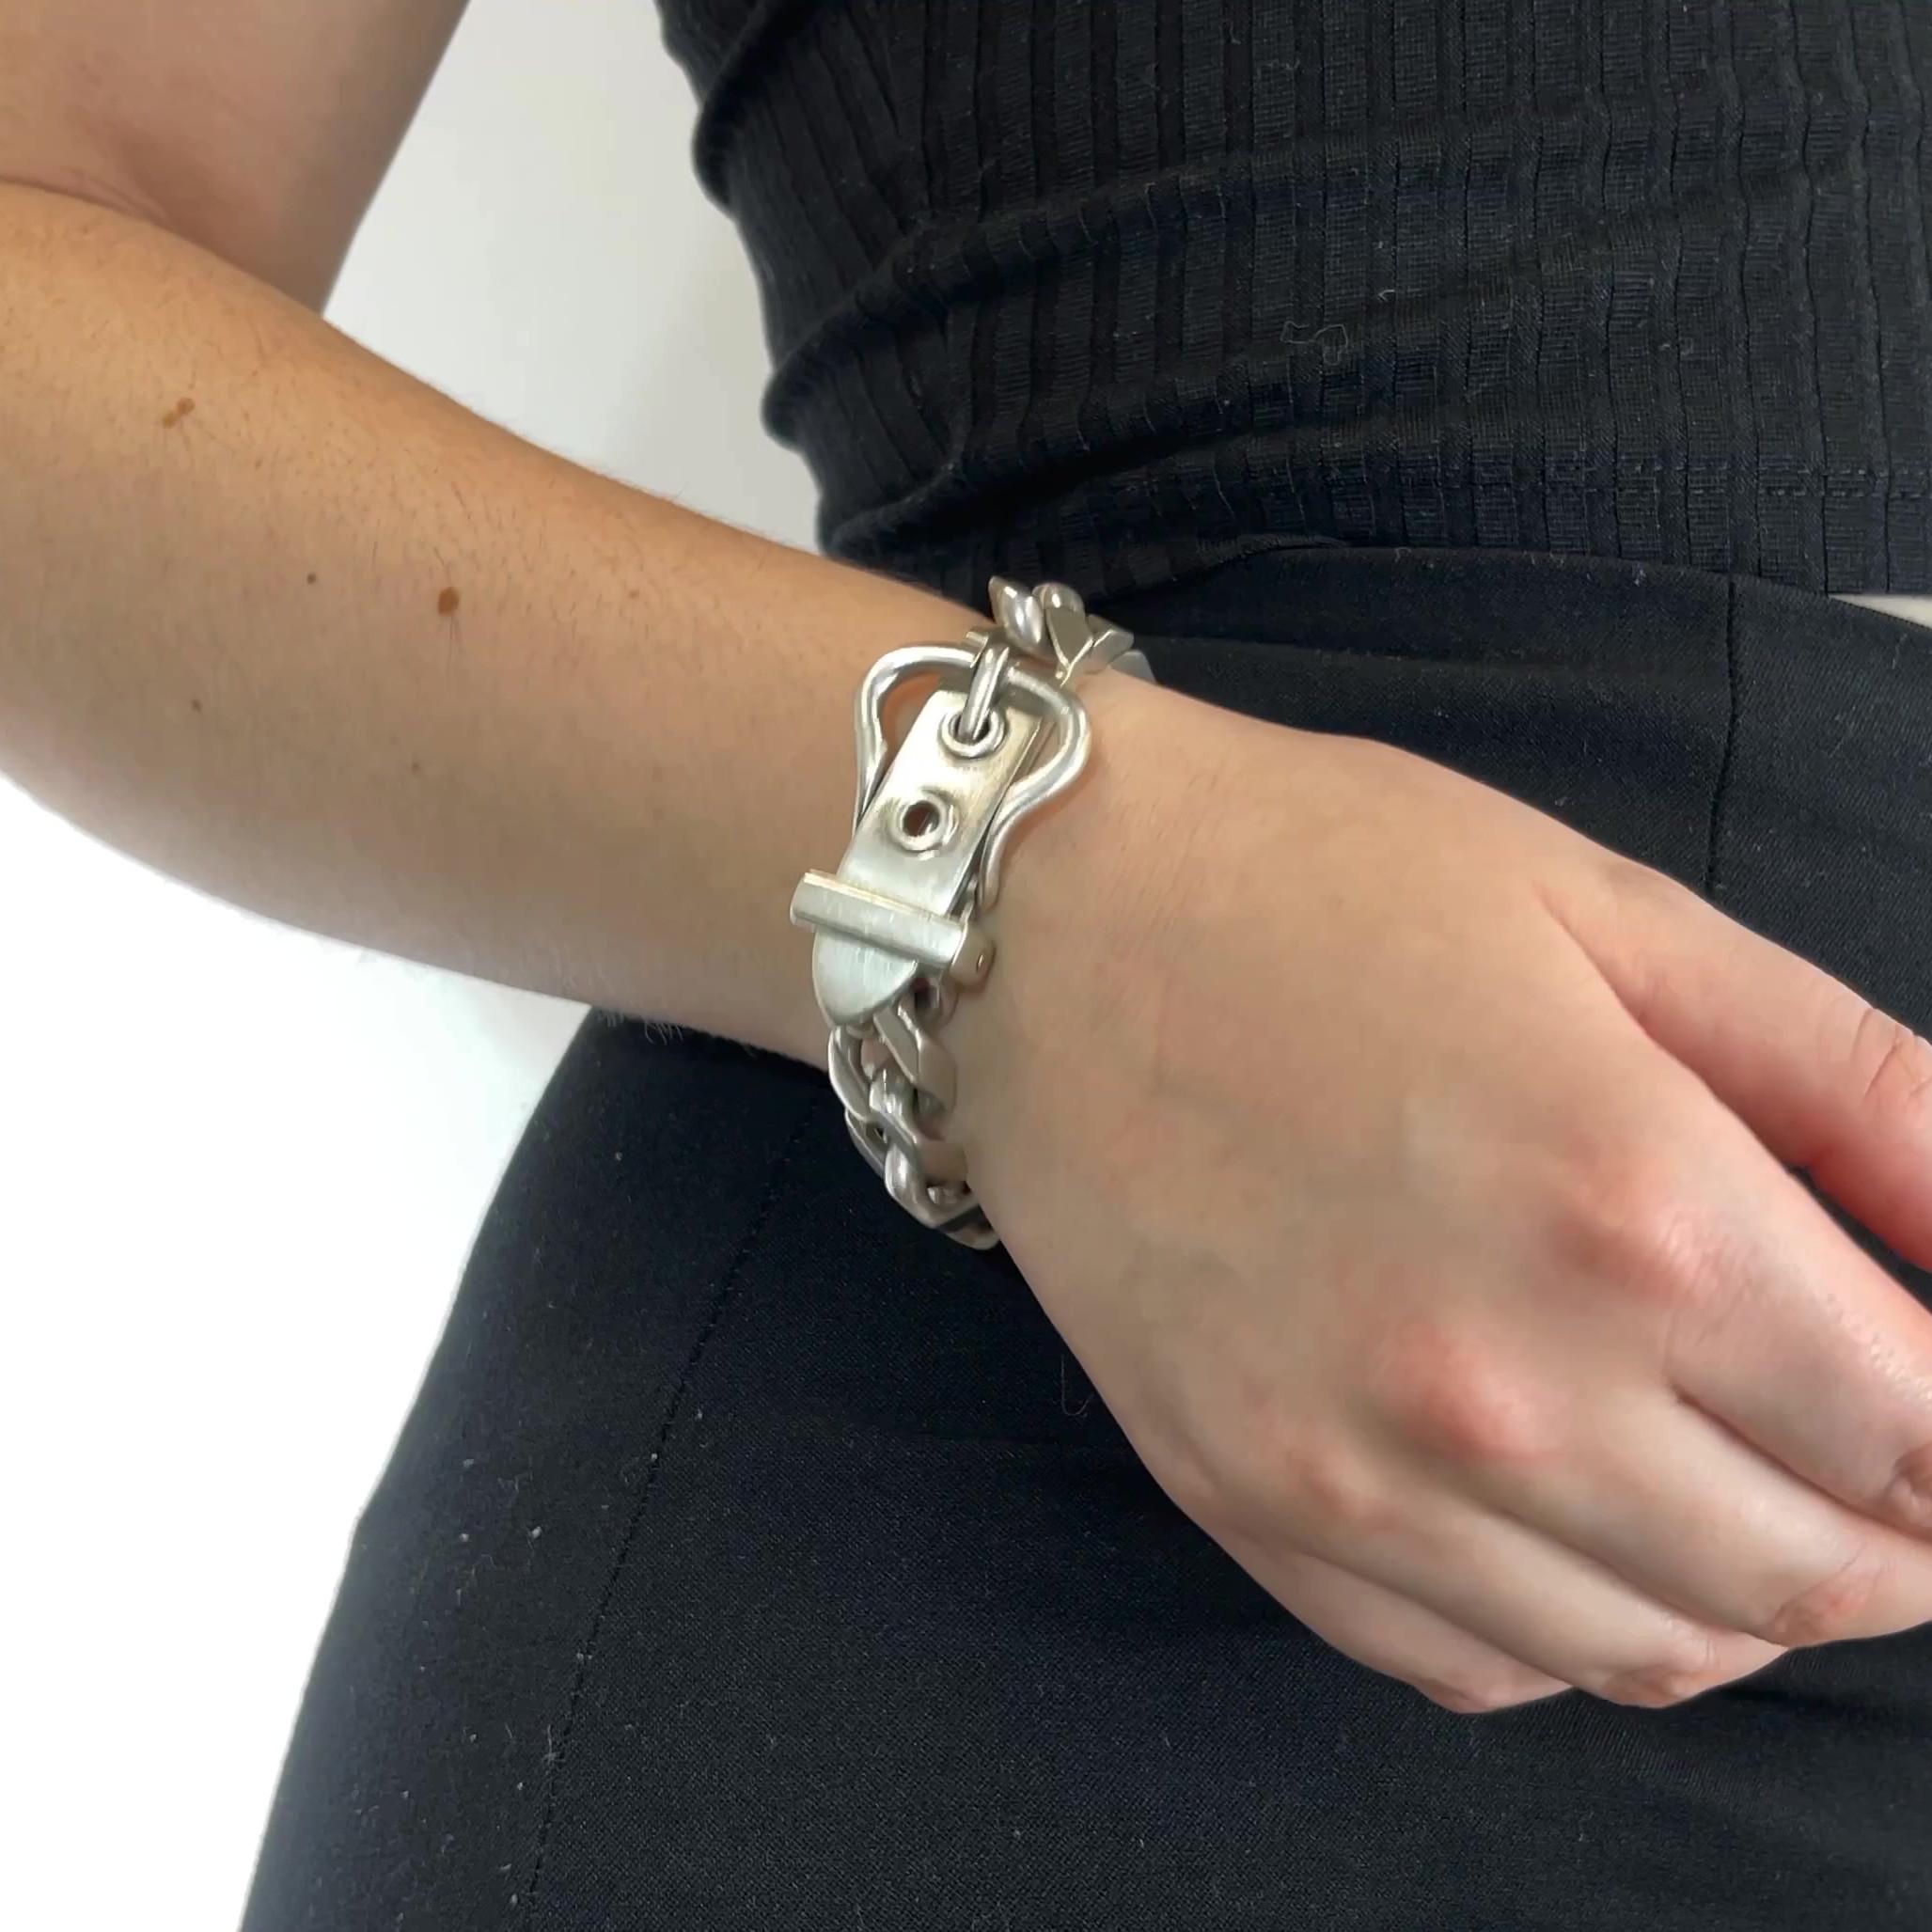 One Vintage Hermes Cuban Link Chain Belt Bracelet. Crafted in sterling silver with purity mark, signed Hermes. Circa 2000s. Original receipt included. The bracelet measures 9 inches in total length and best fits a wrist that is 7-8 inches. 

About